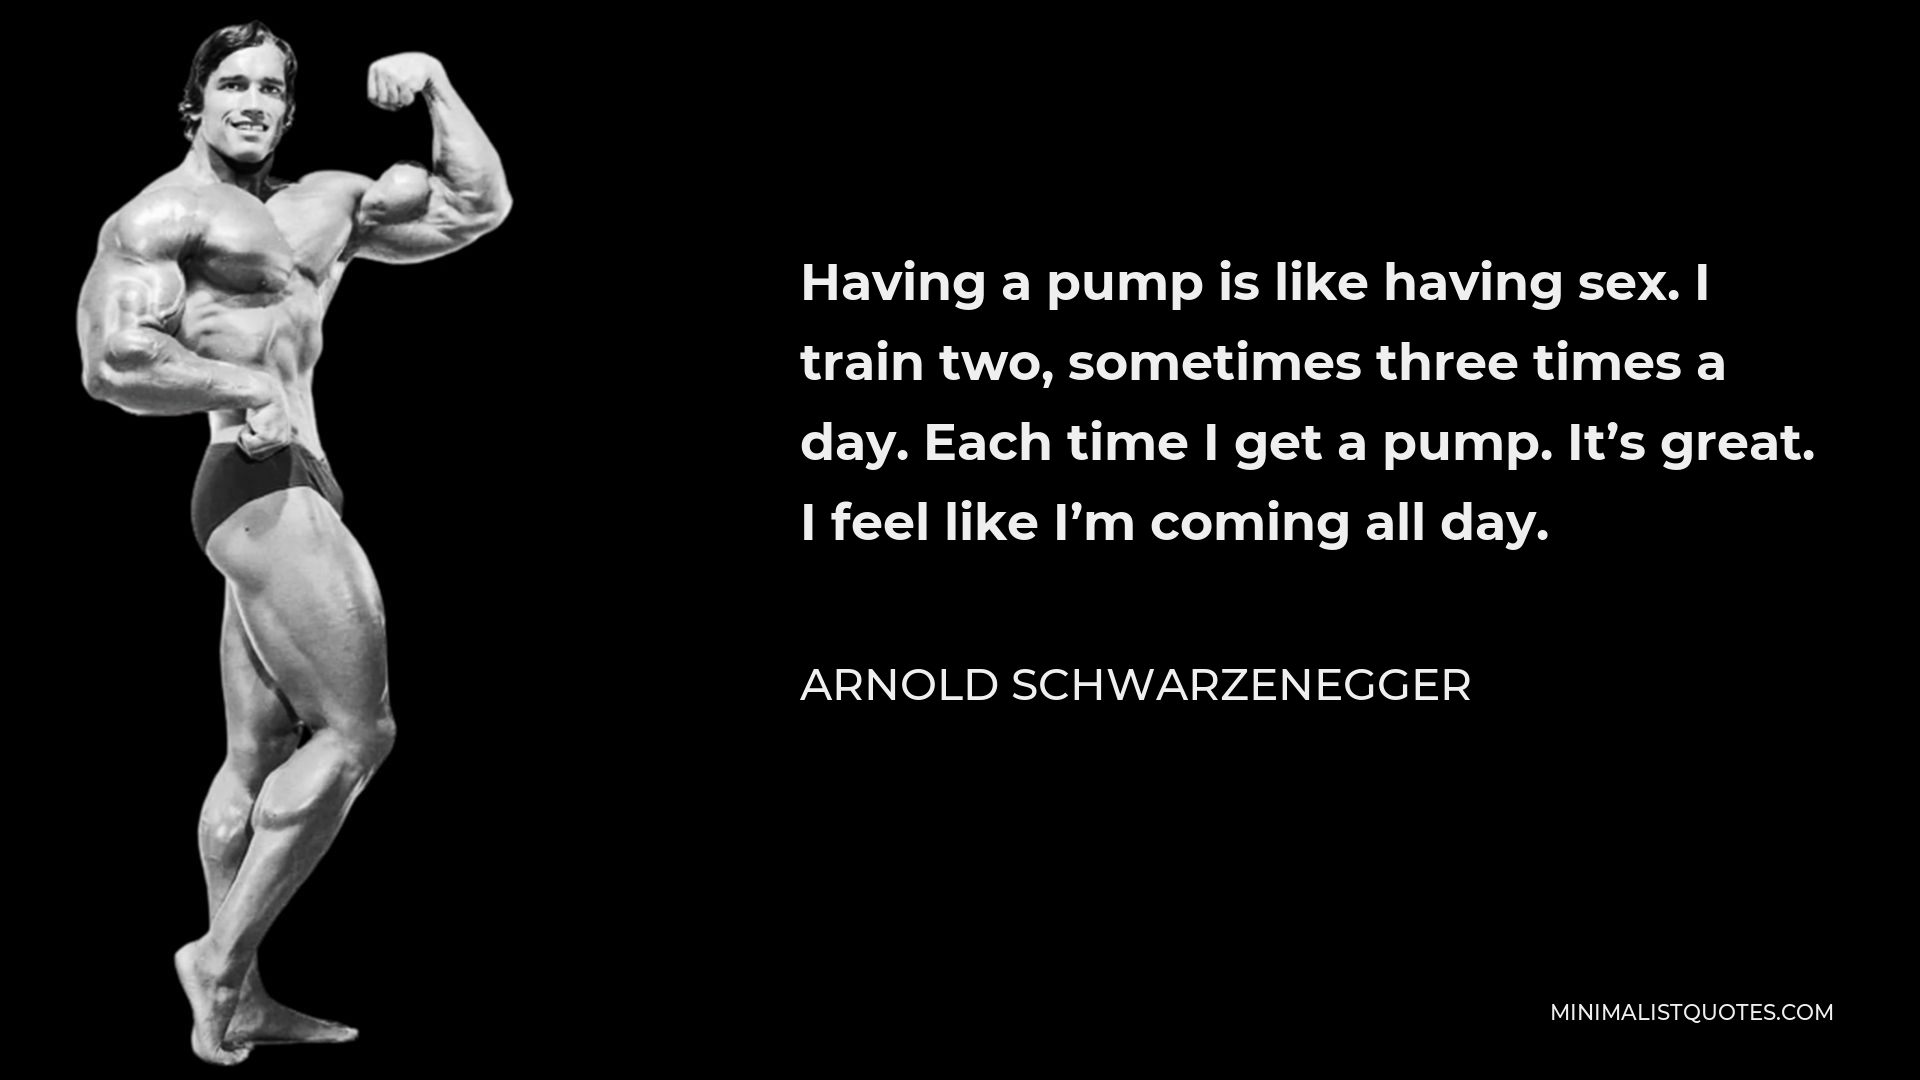 Arnold Schwarzenegger Quote - Having a pump is like having sex. I train two, sometimes three times a day. Each time I get a pump. It’s great. I feel like I’m coming all day.